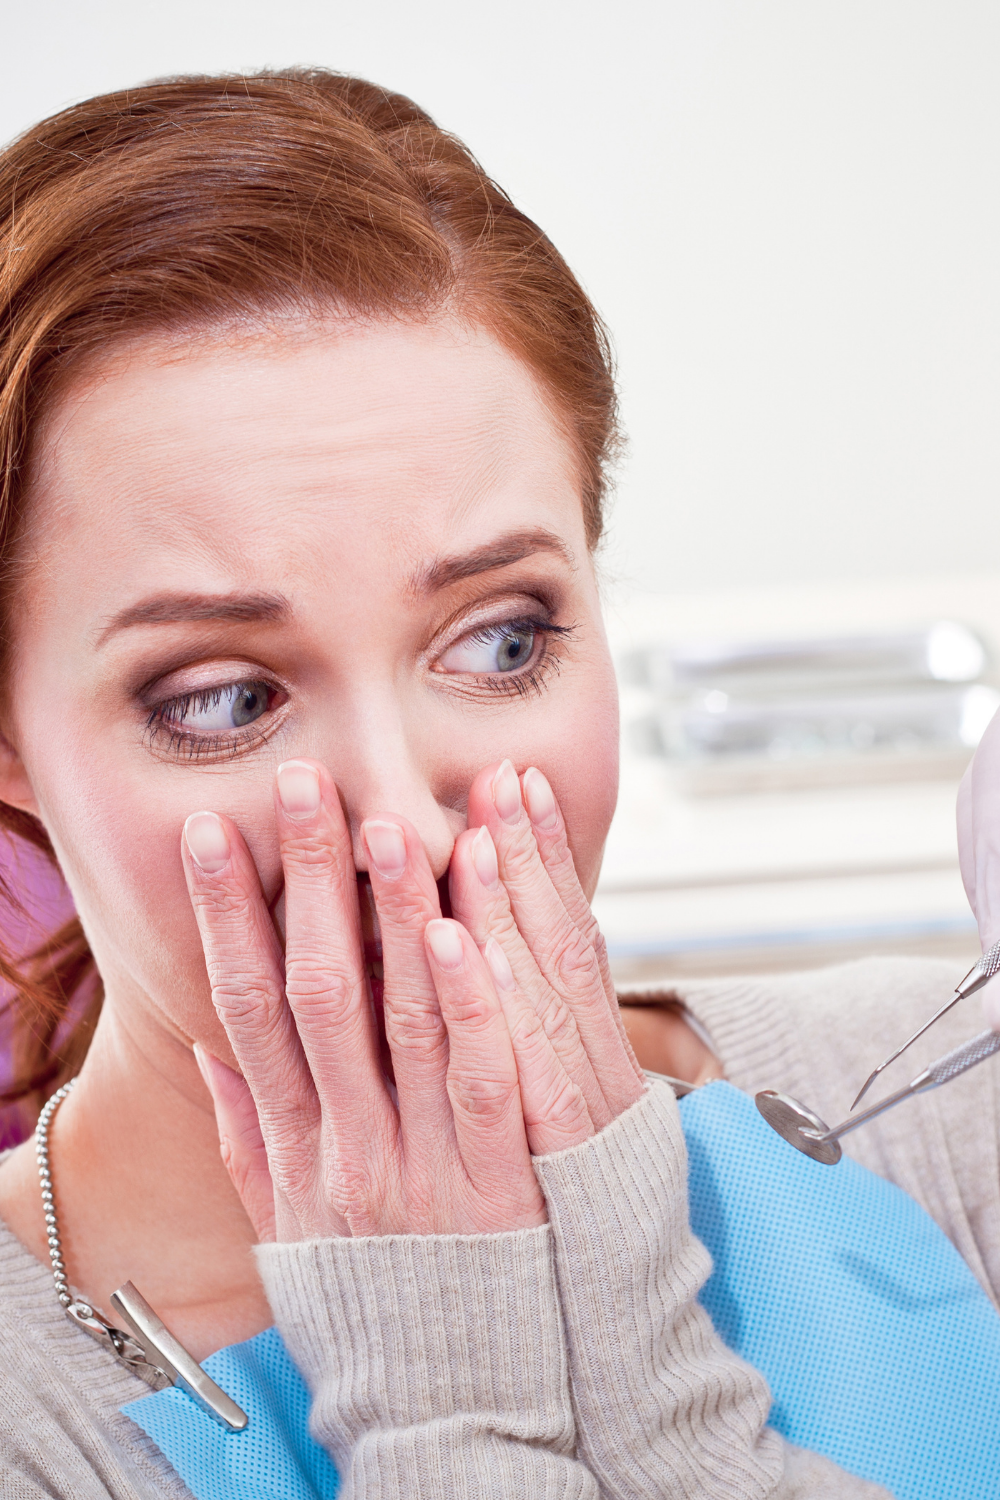 Preventing Your Dental Anxiety Before Your Endodontic Re-Treatment Procedure